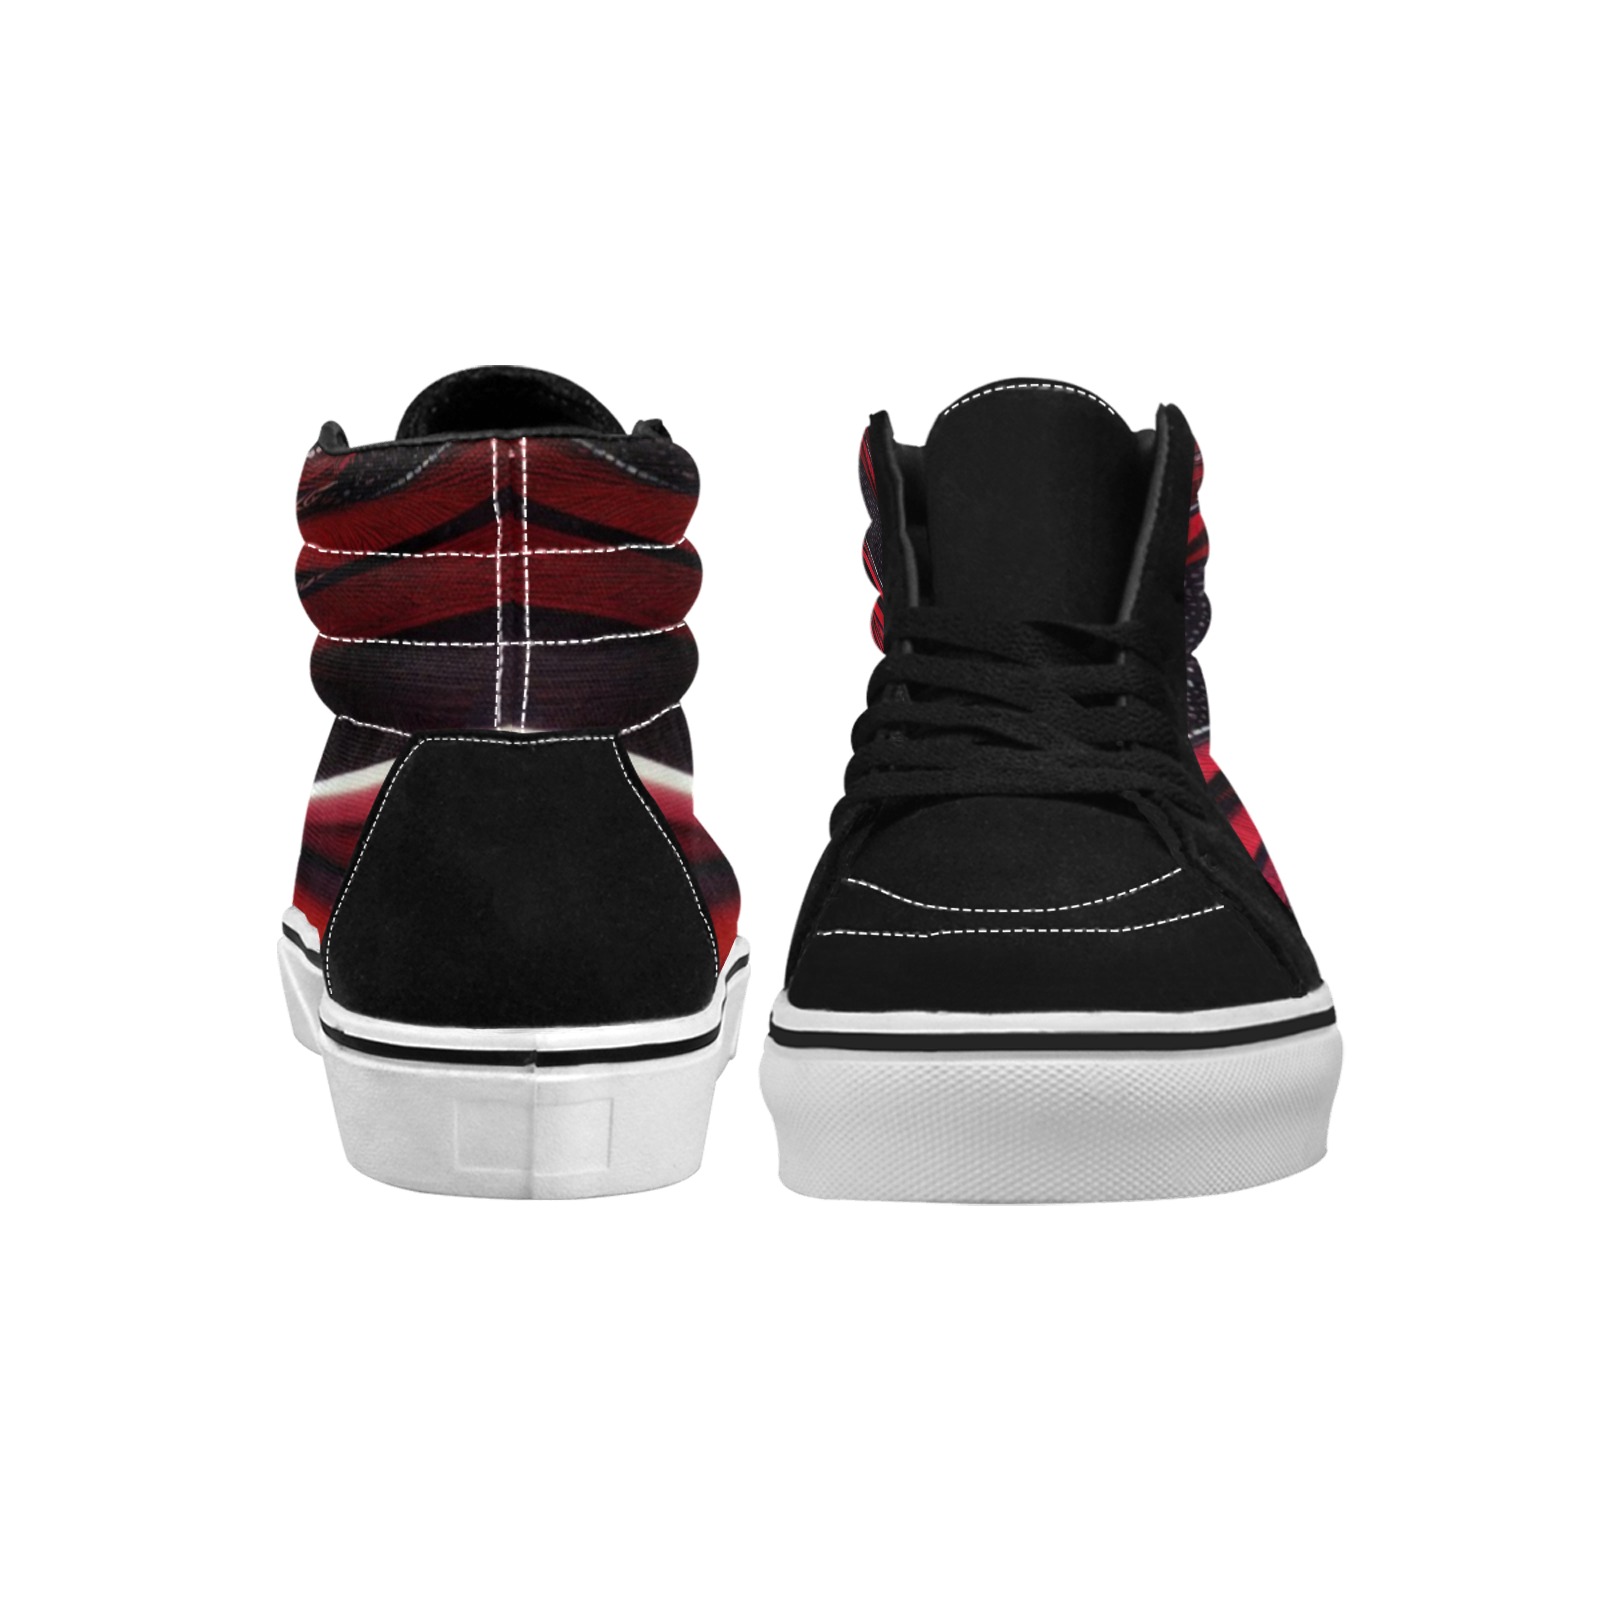 red and black wave's #3 Men's High Top Skateboarding Shoes (Model E001-1)